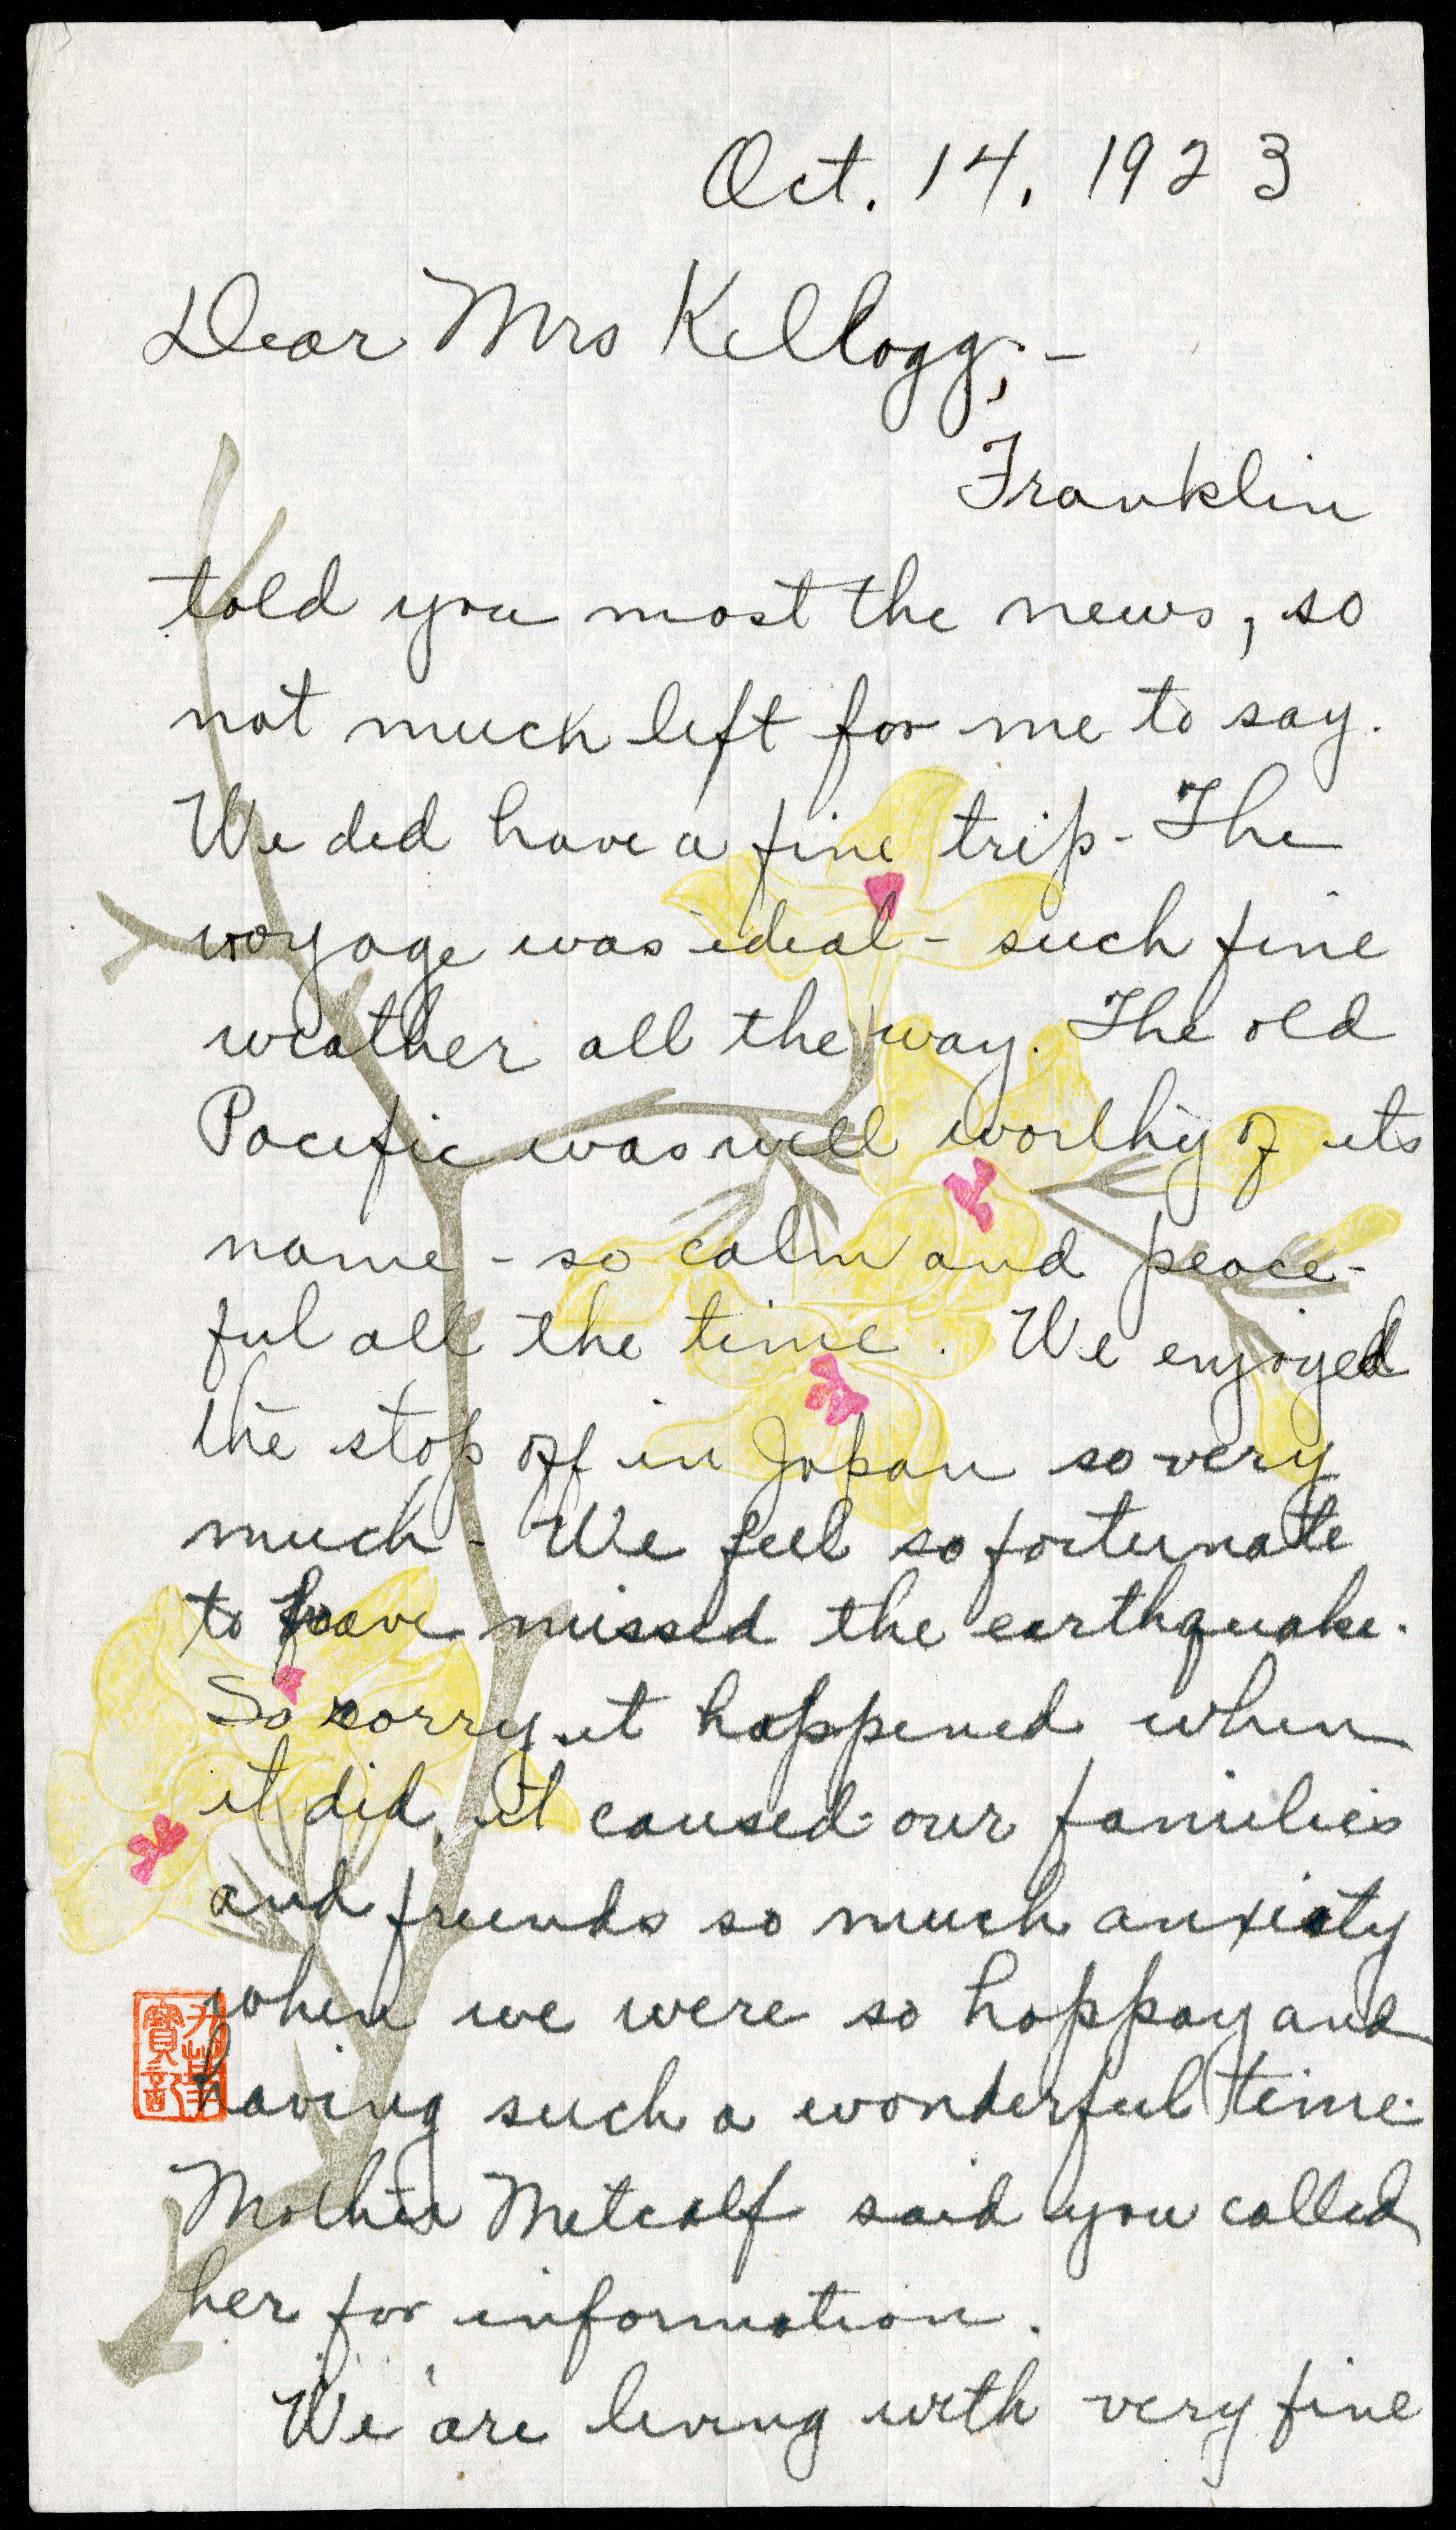 Letter from Mabel Truss Metcalf to Marguerite Henrich Kellogg, October 14, 1923, page 1.